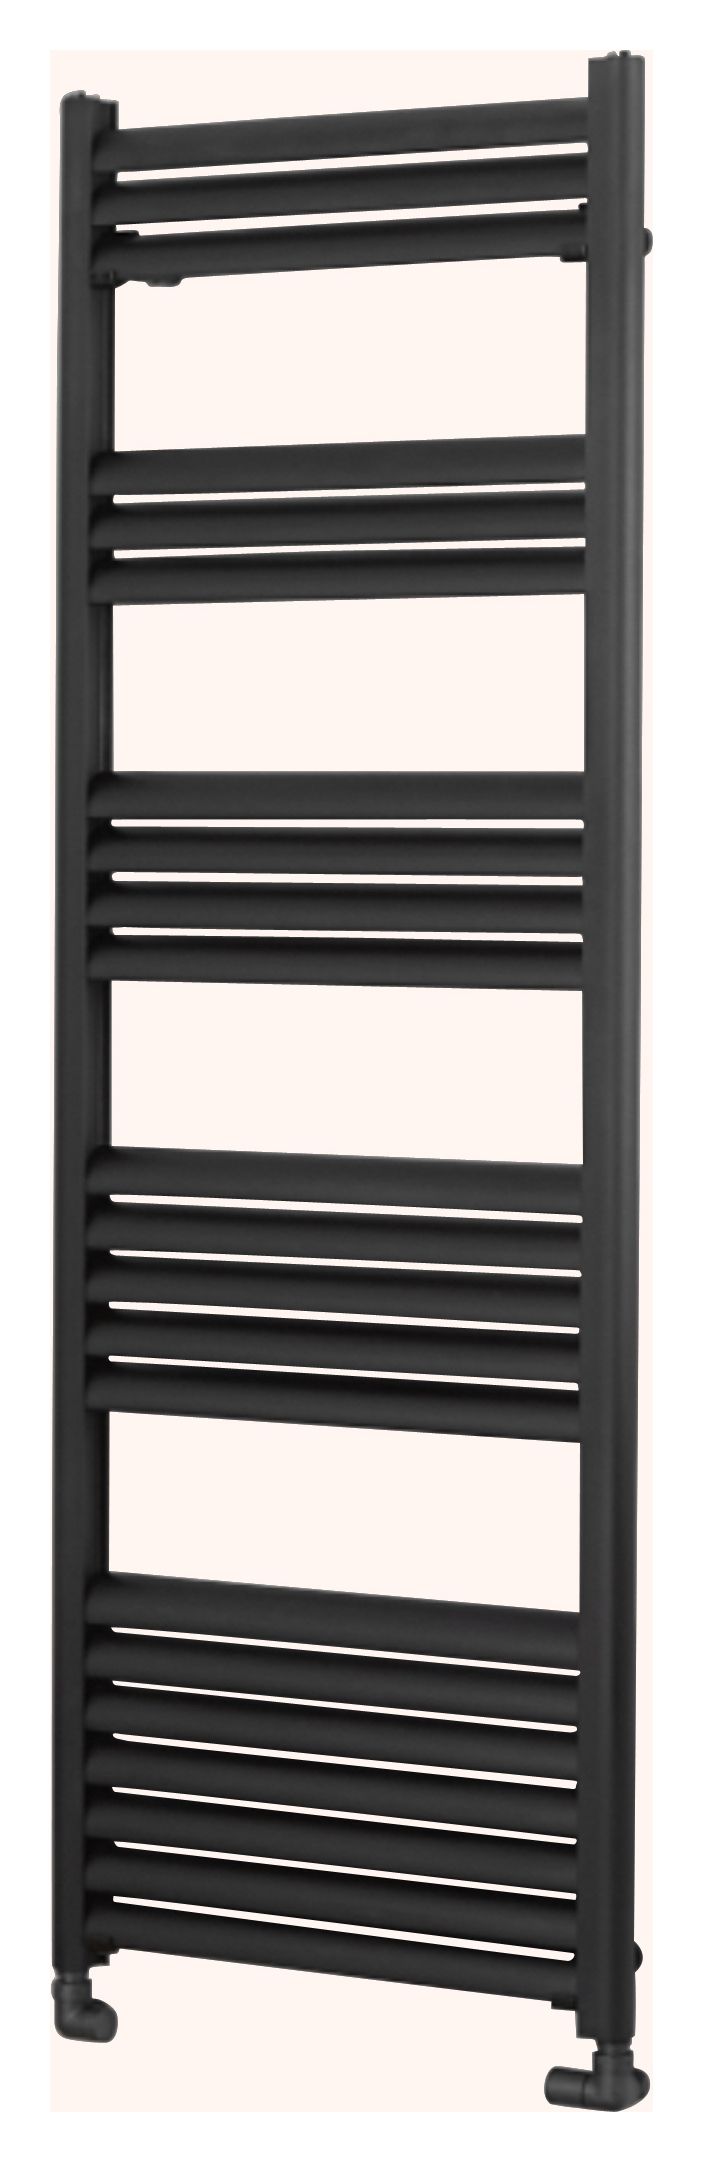 Towelrads Eton Anthracite Radiator - 1400mm - Various Widths Available